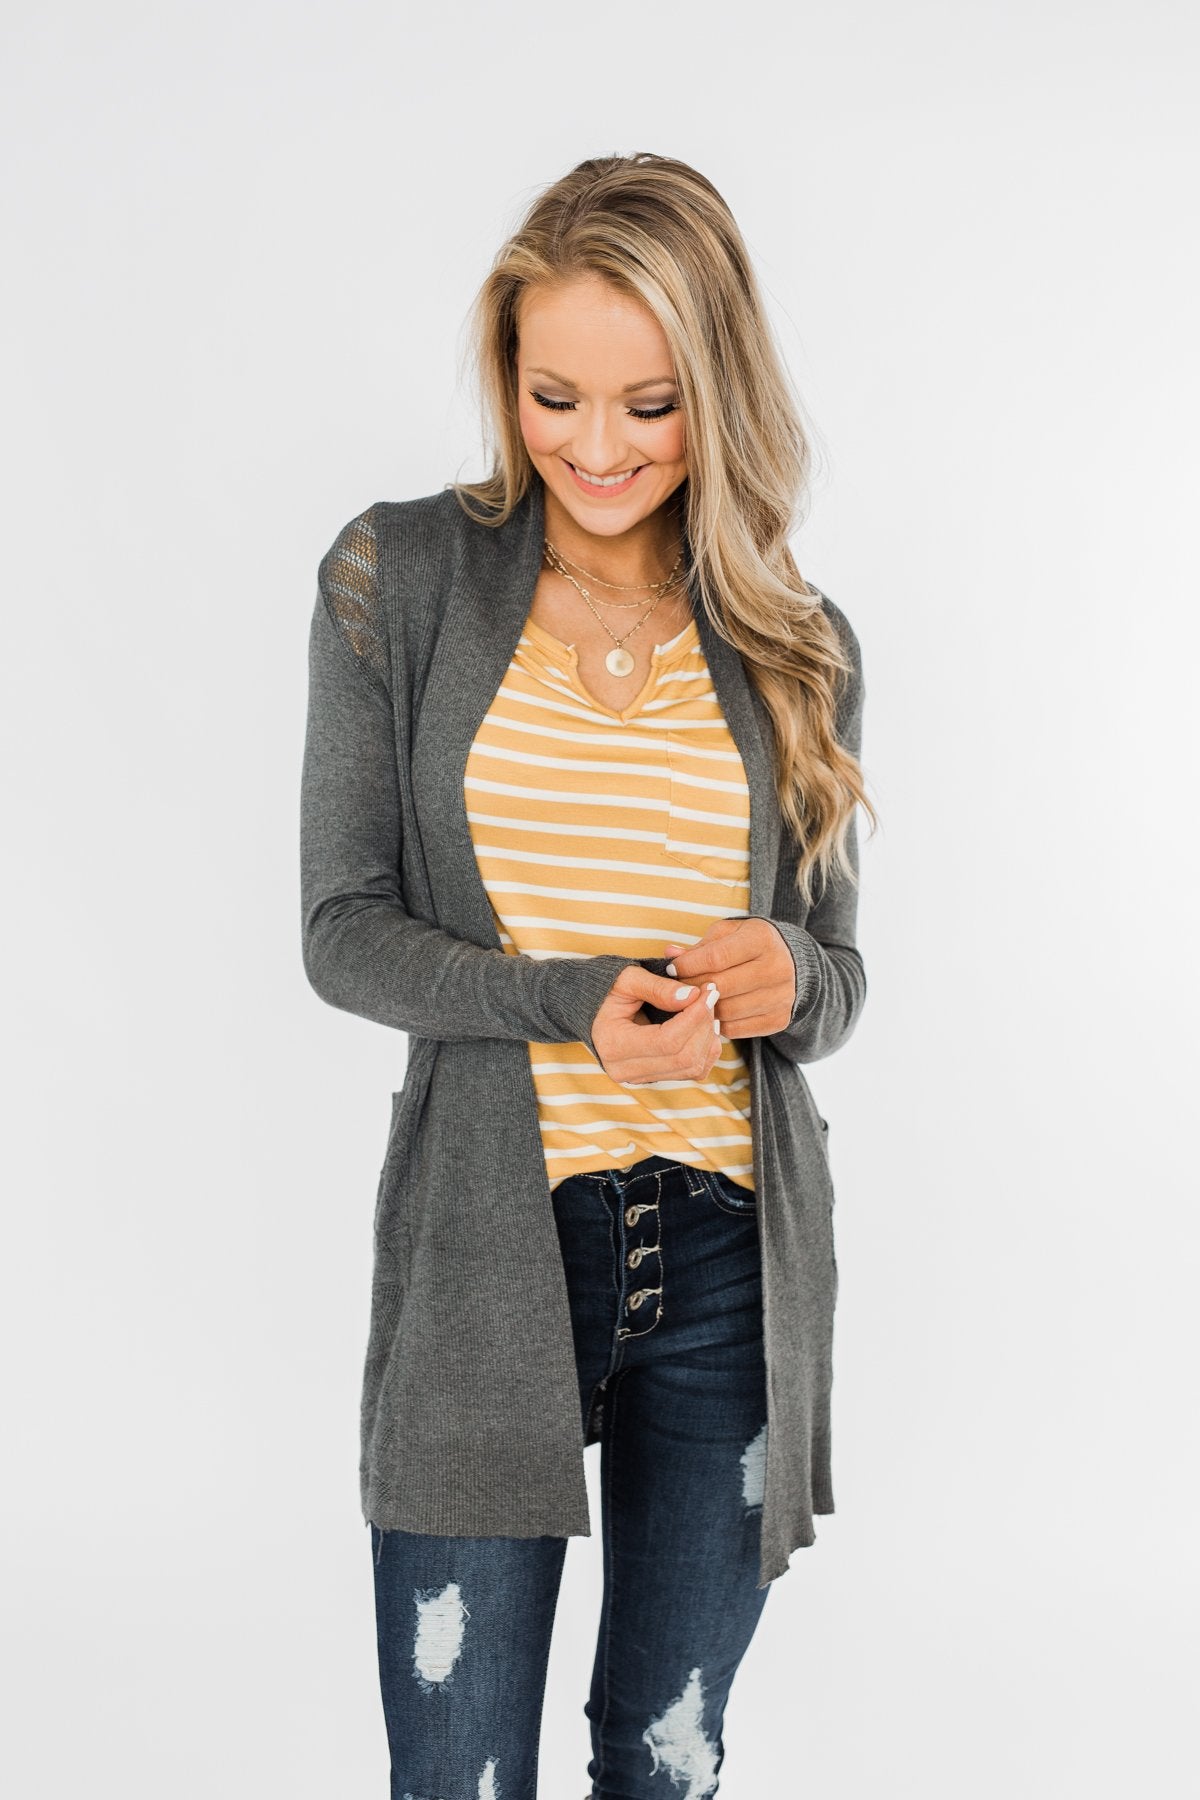 Lots of Love Knit Cardigan- Charcoal